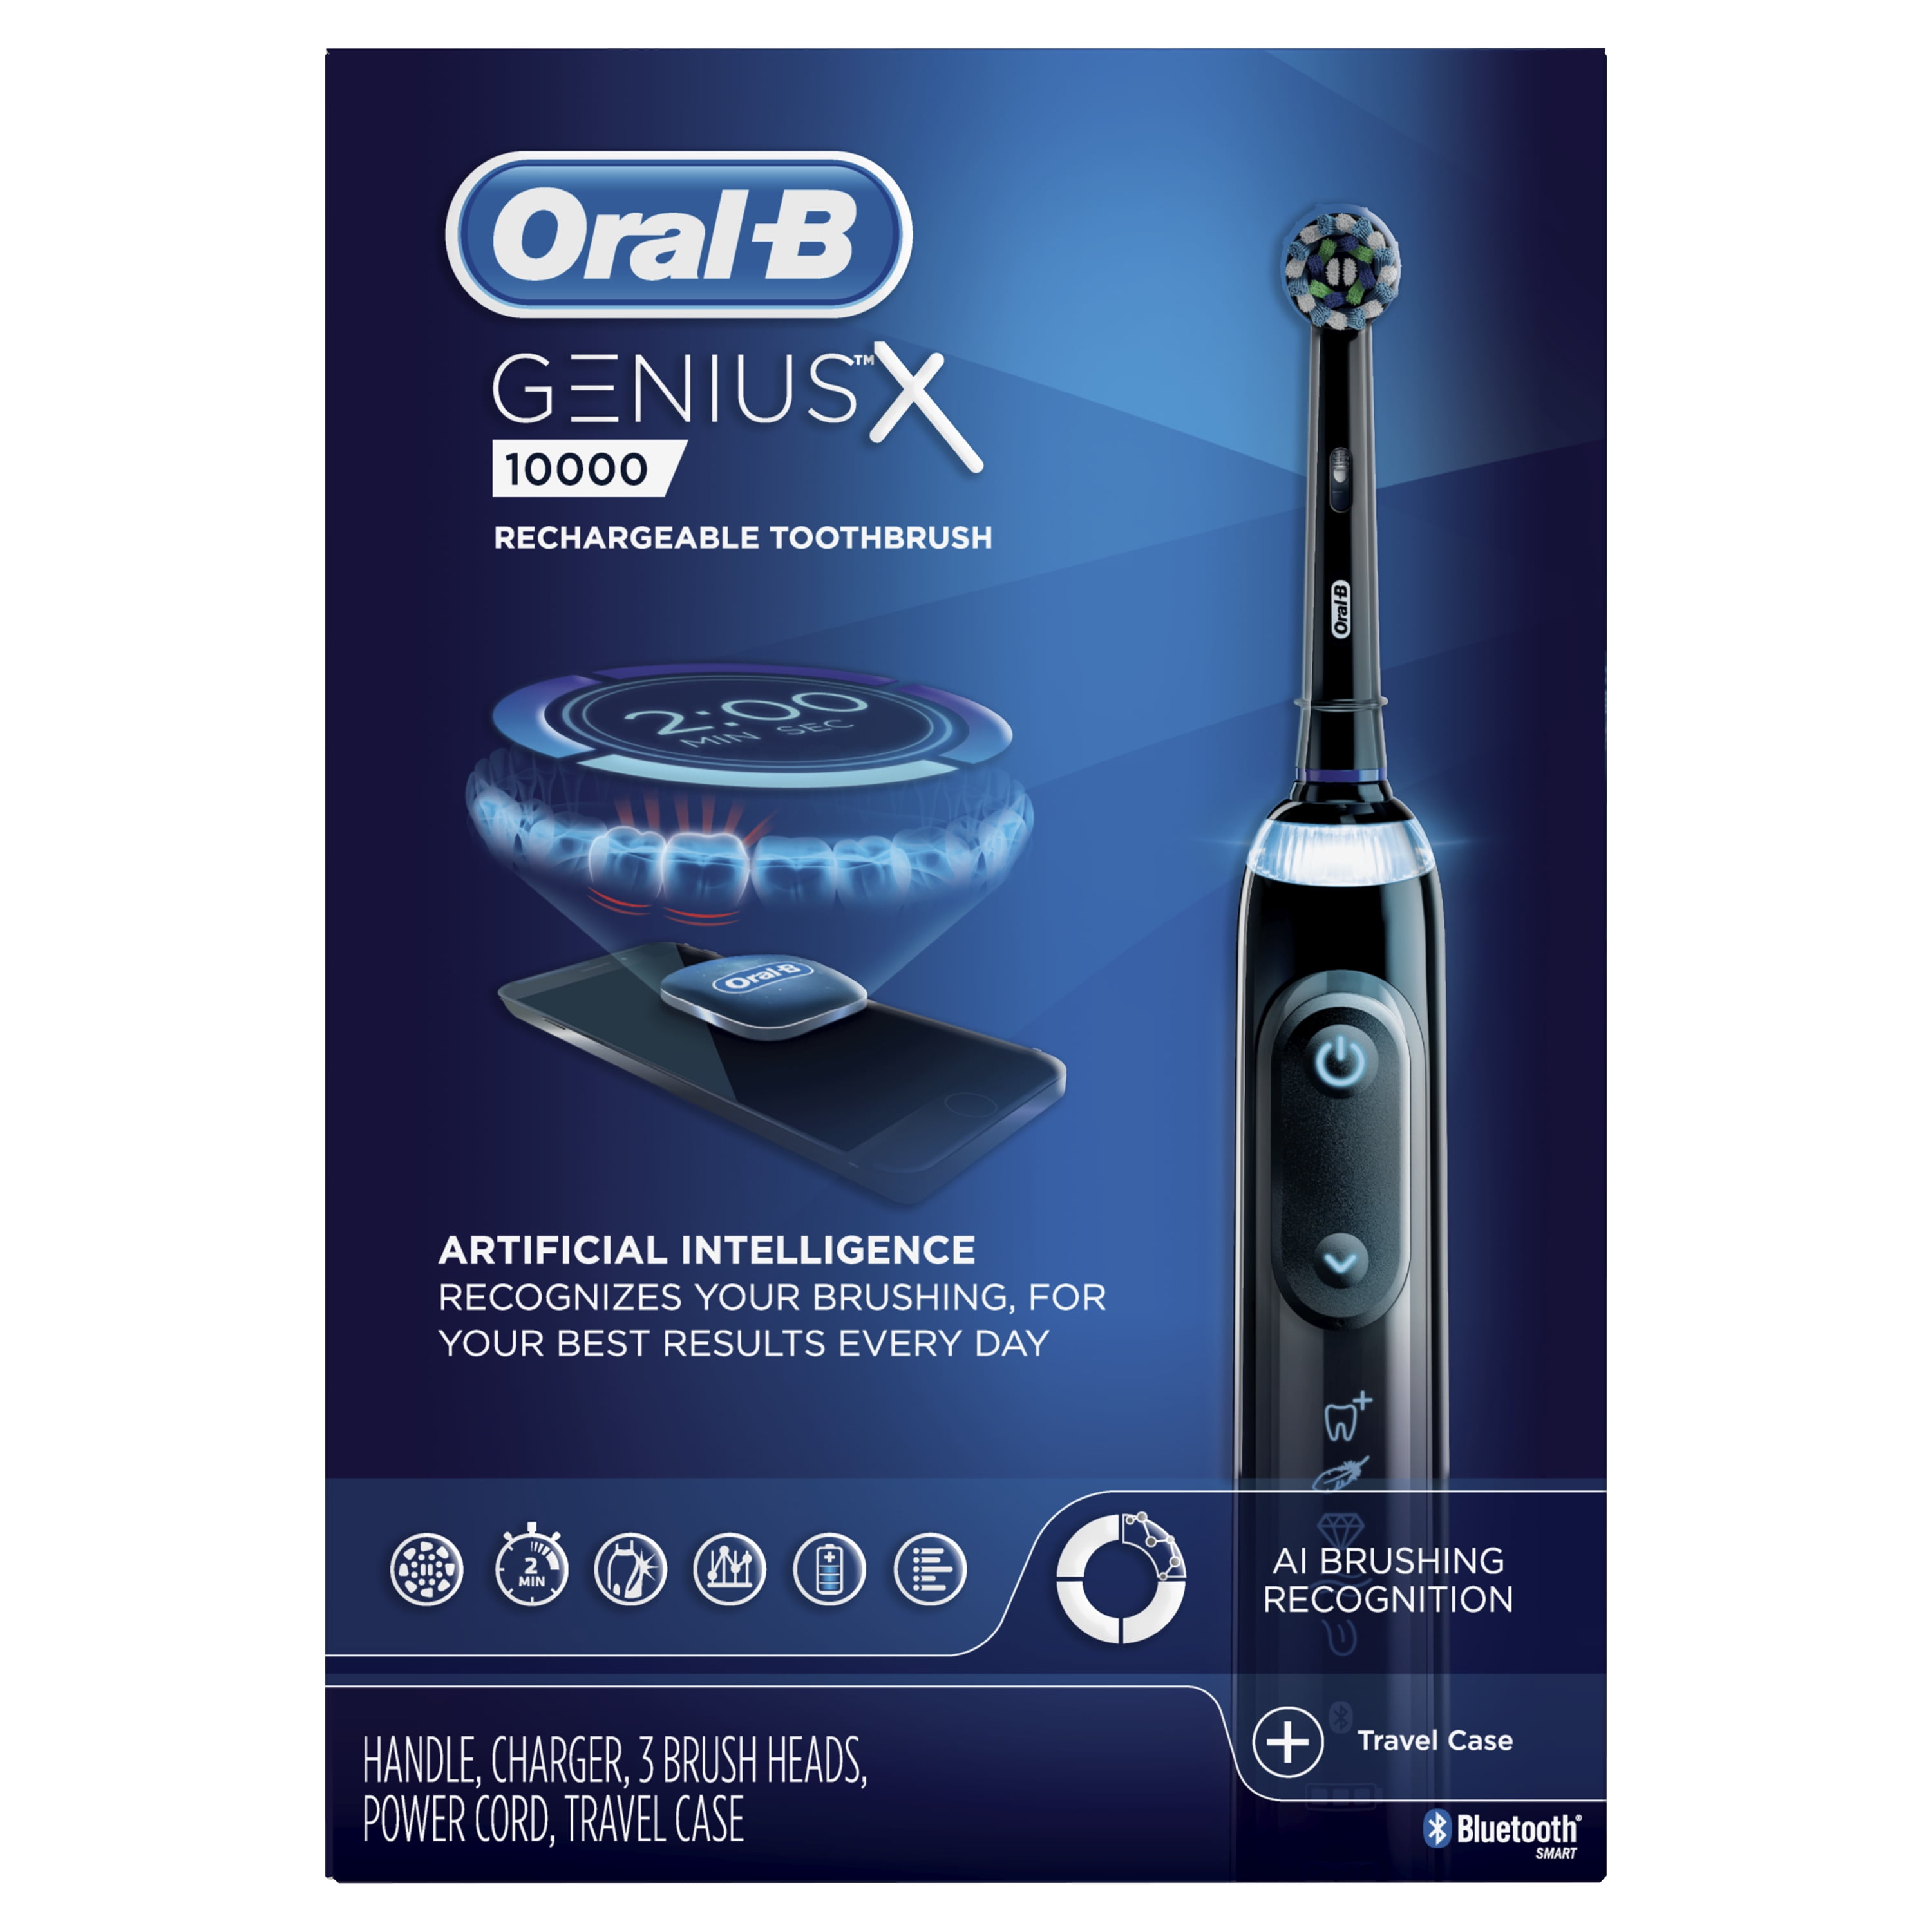 Oral-B Genius X 10000 Rechargeable Electric Toothbrush With Artificial Intelligence, 3 Brush Heads, Walmart.com